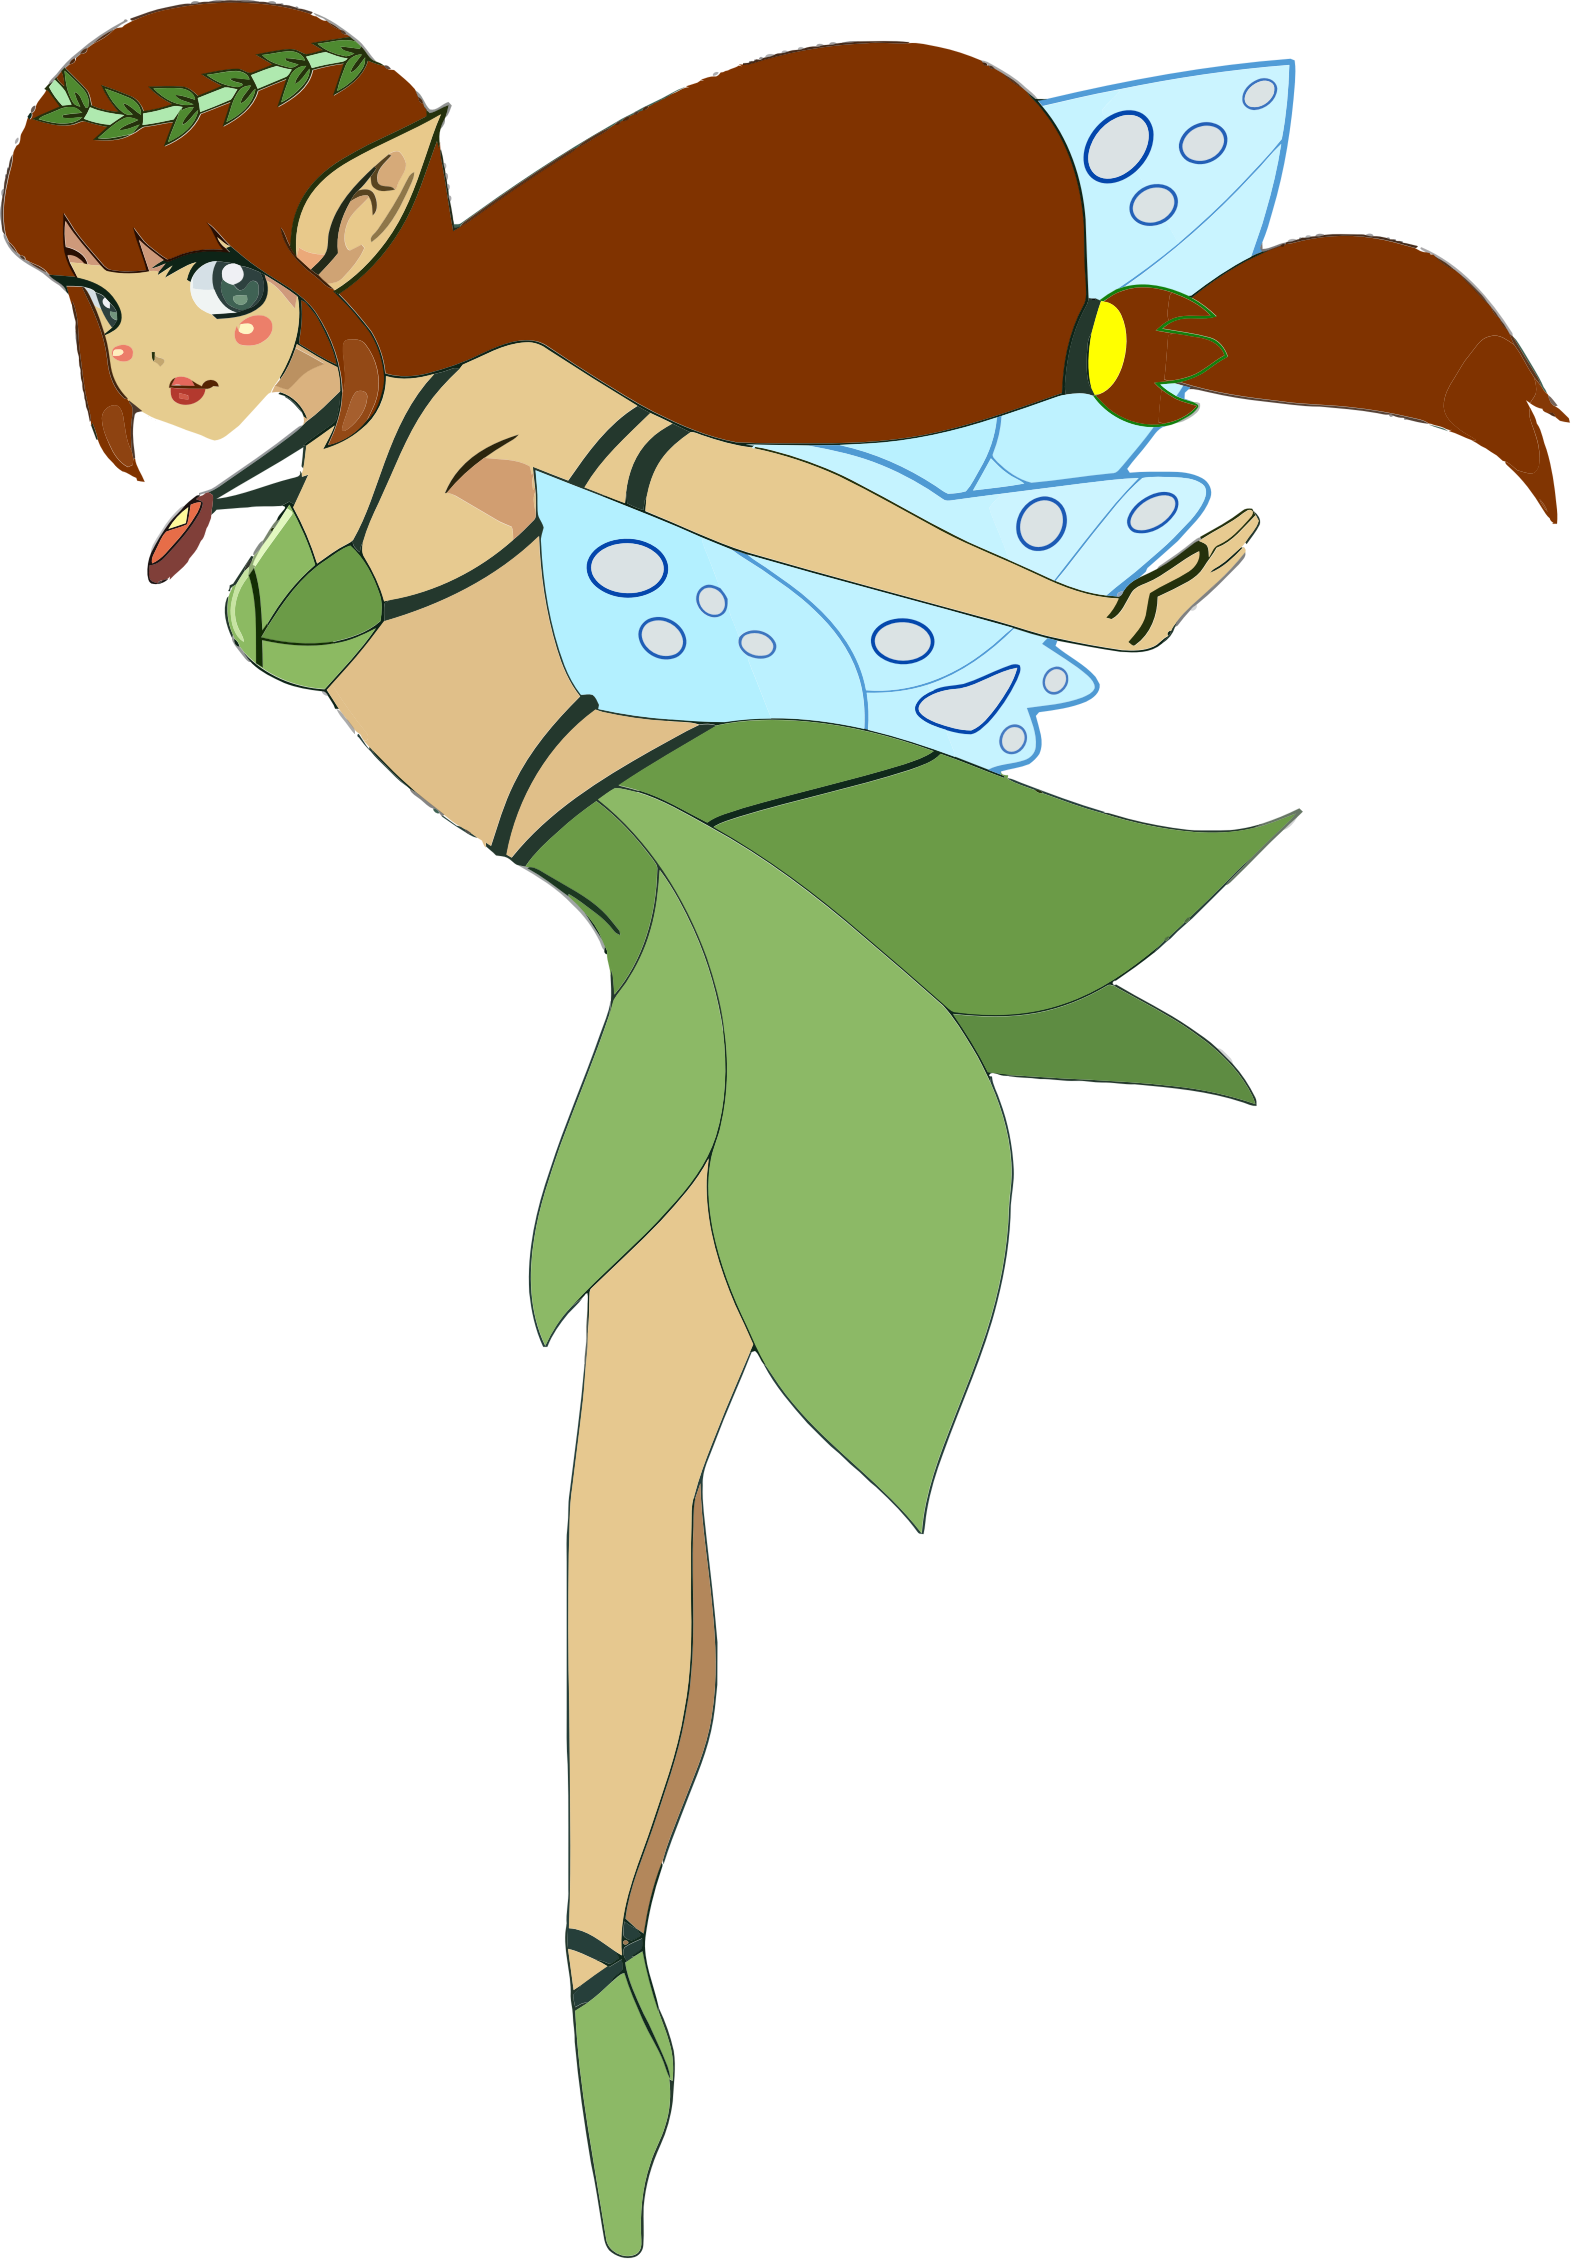 clipart images fairy